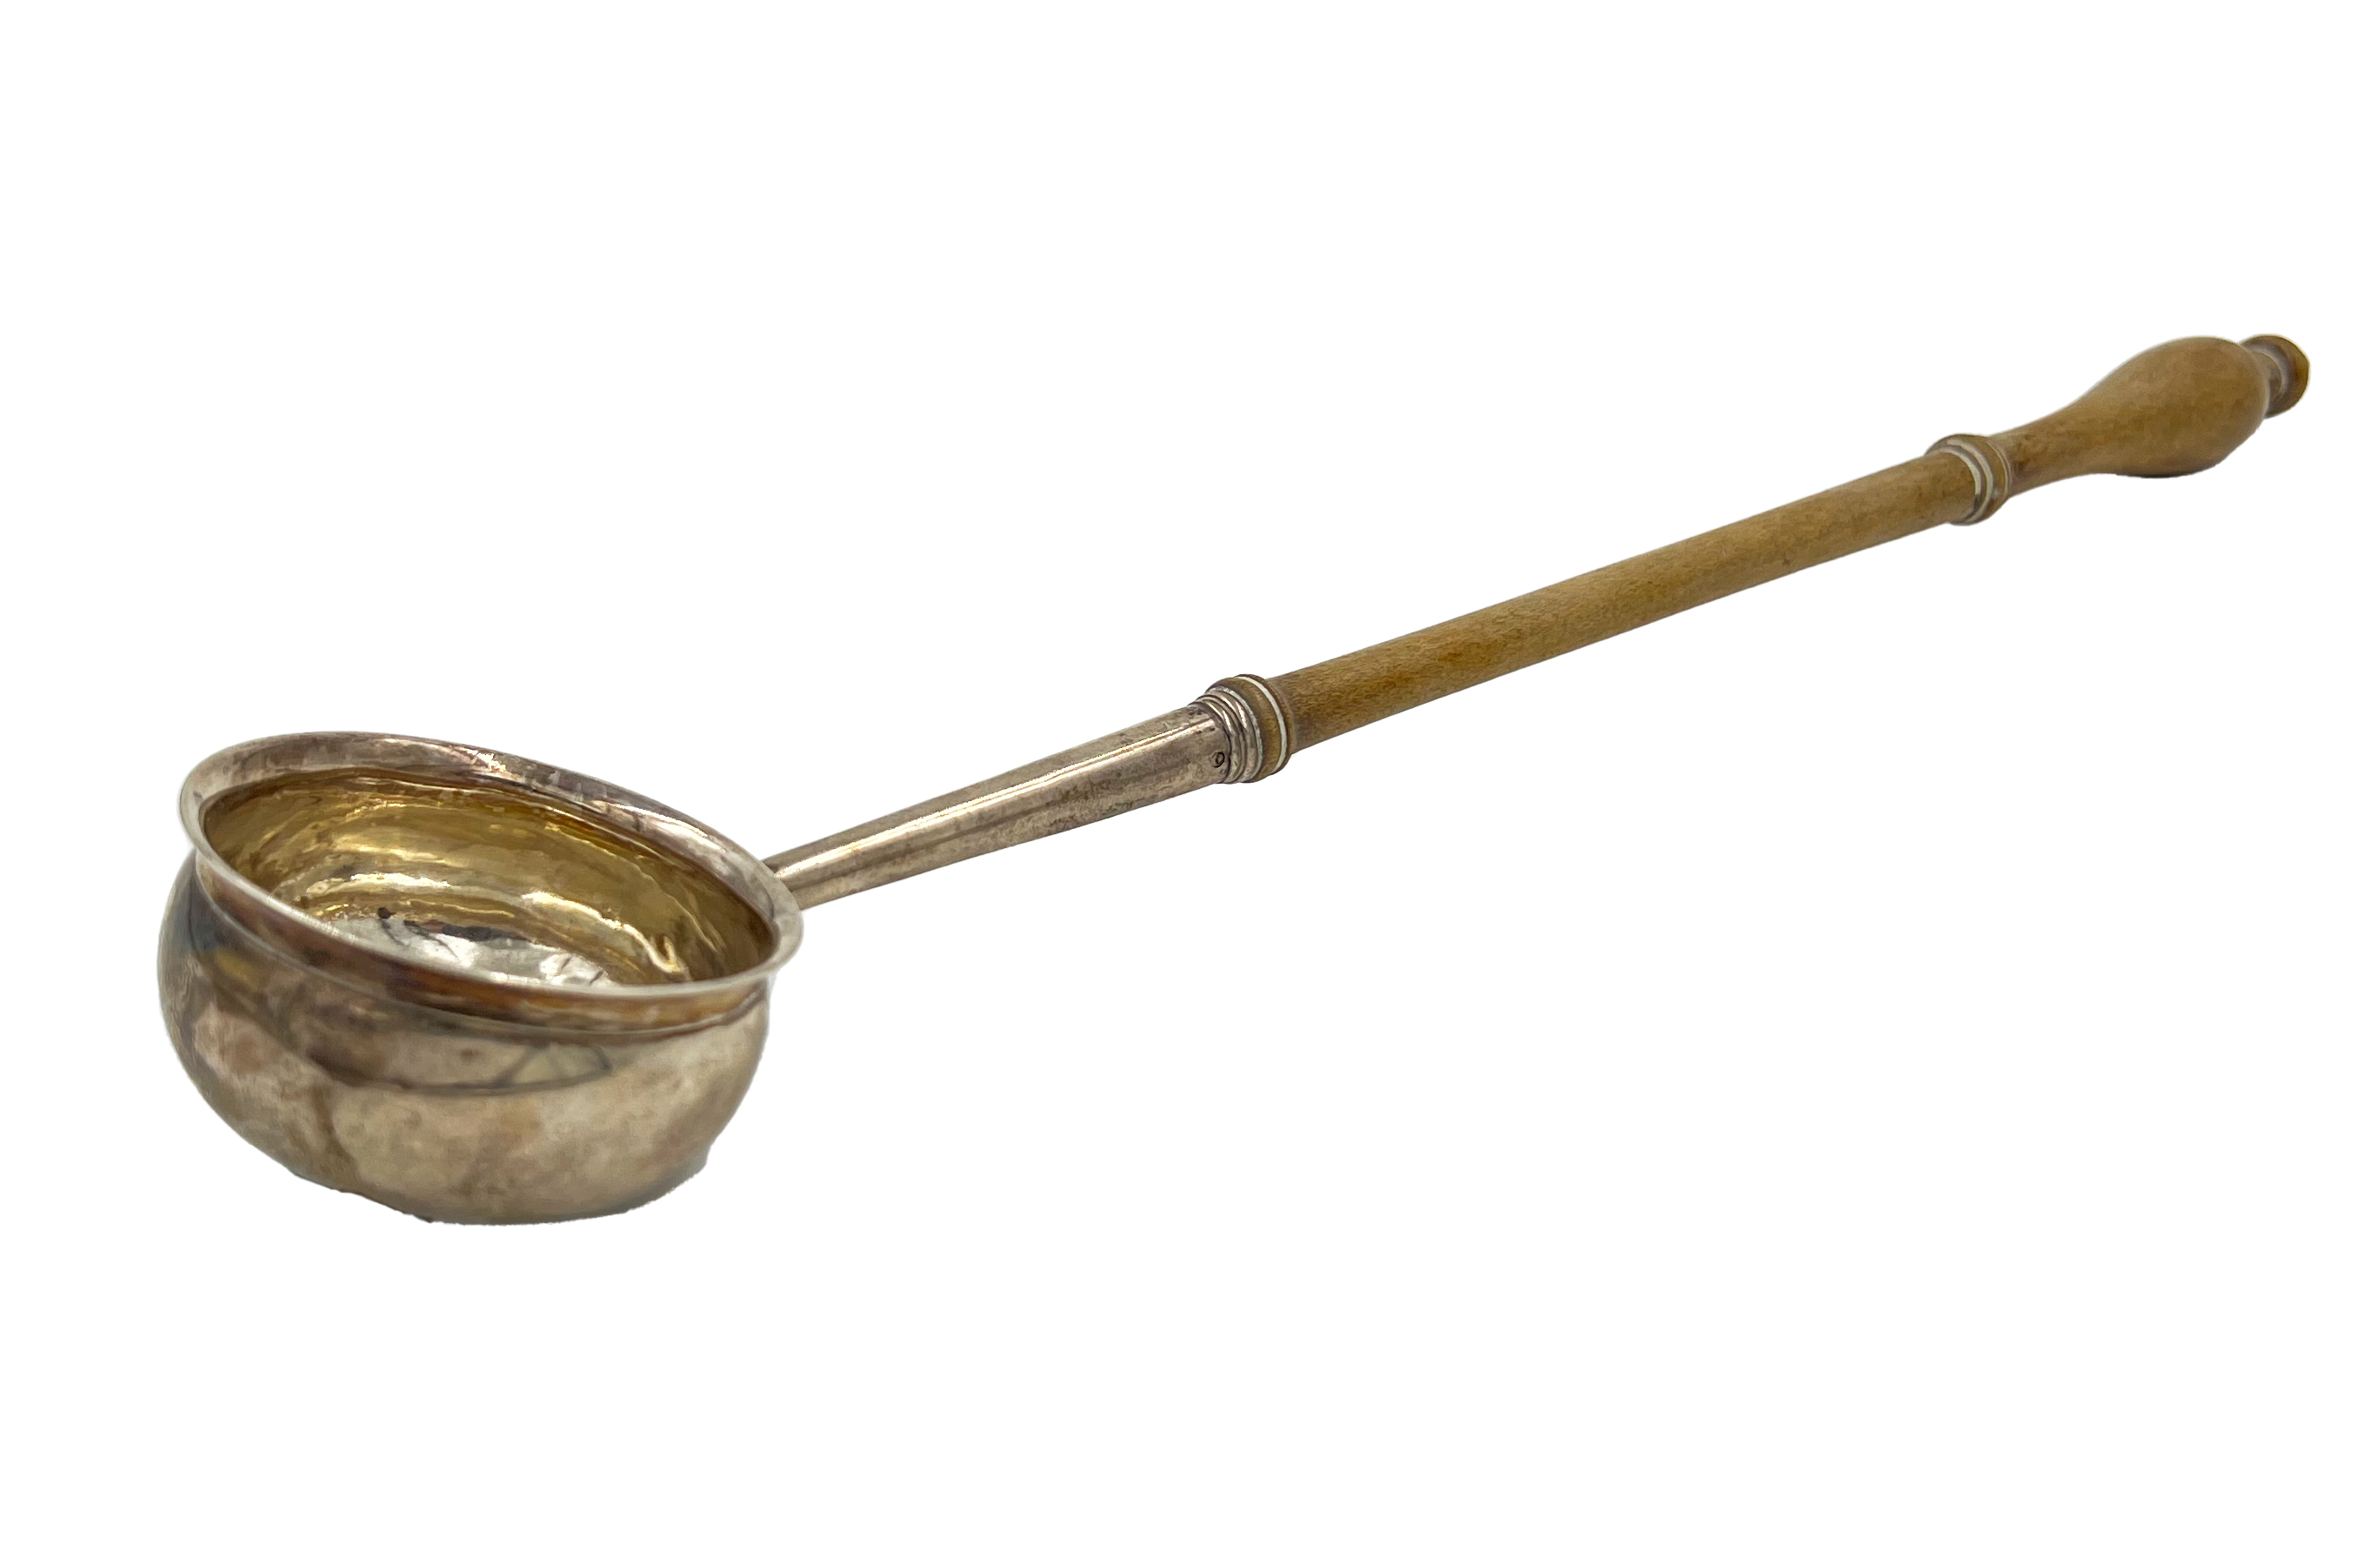 A GEORGIAN SILVER PUNCH/TODDY LADLE WITH TURNED WOODEN HANDLE, LONDON, 1806 - Image 2 of 4